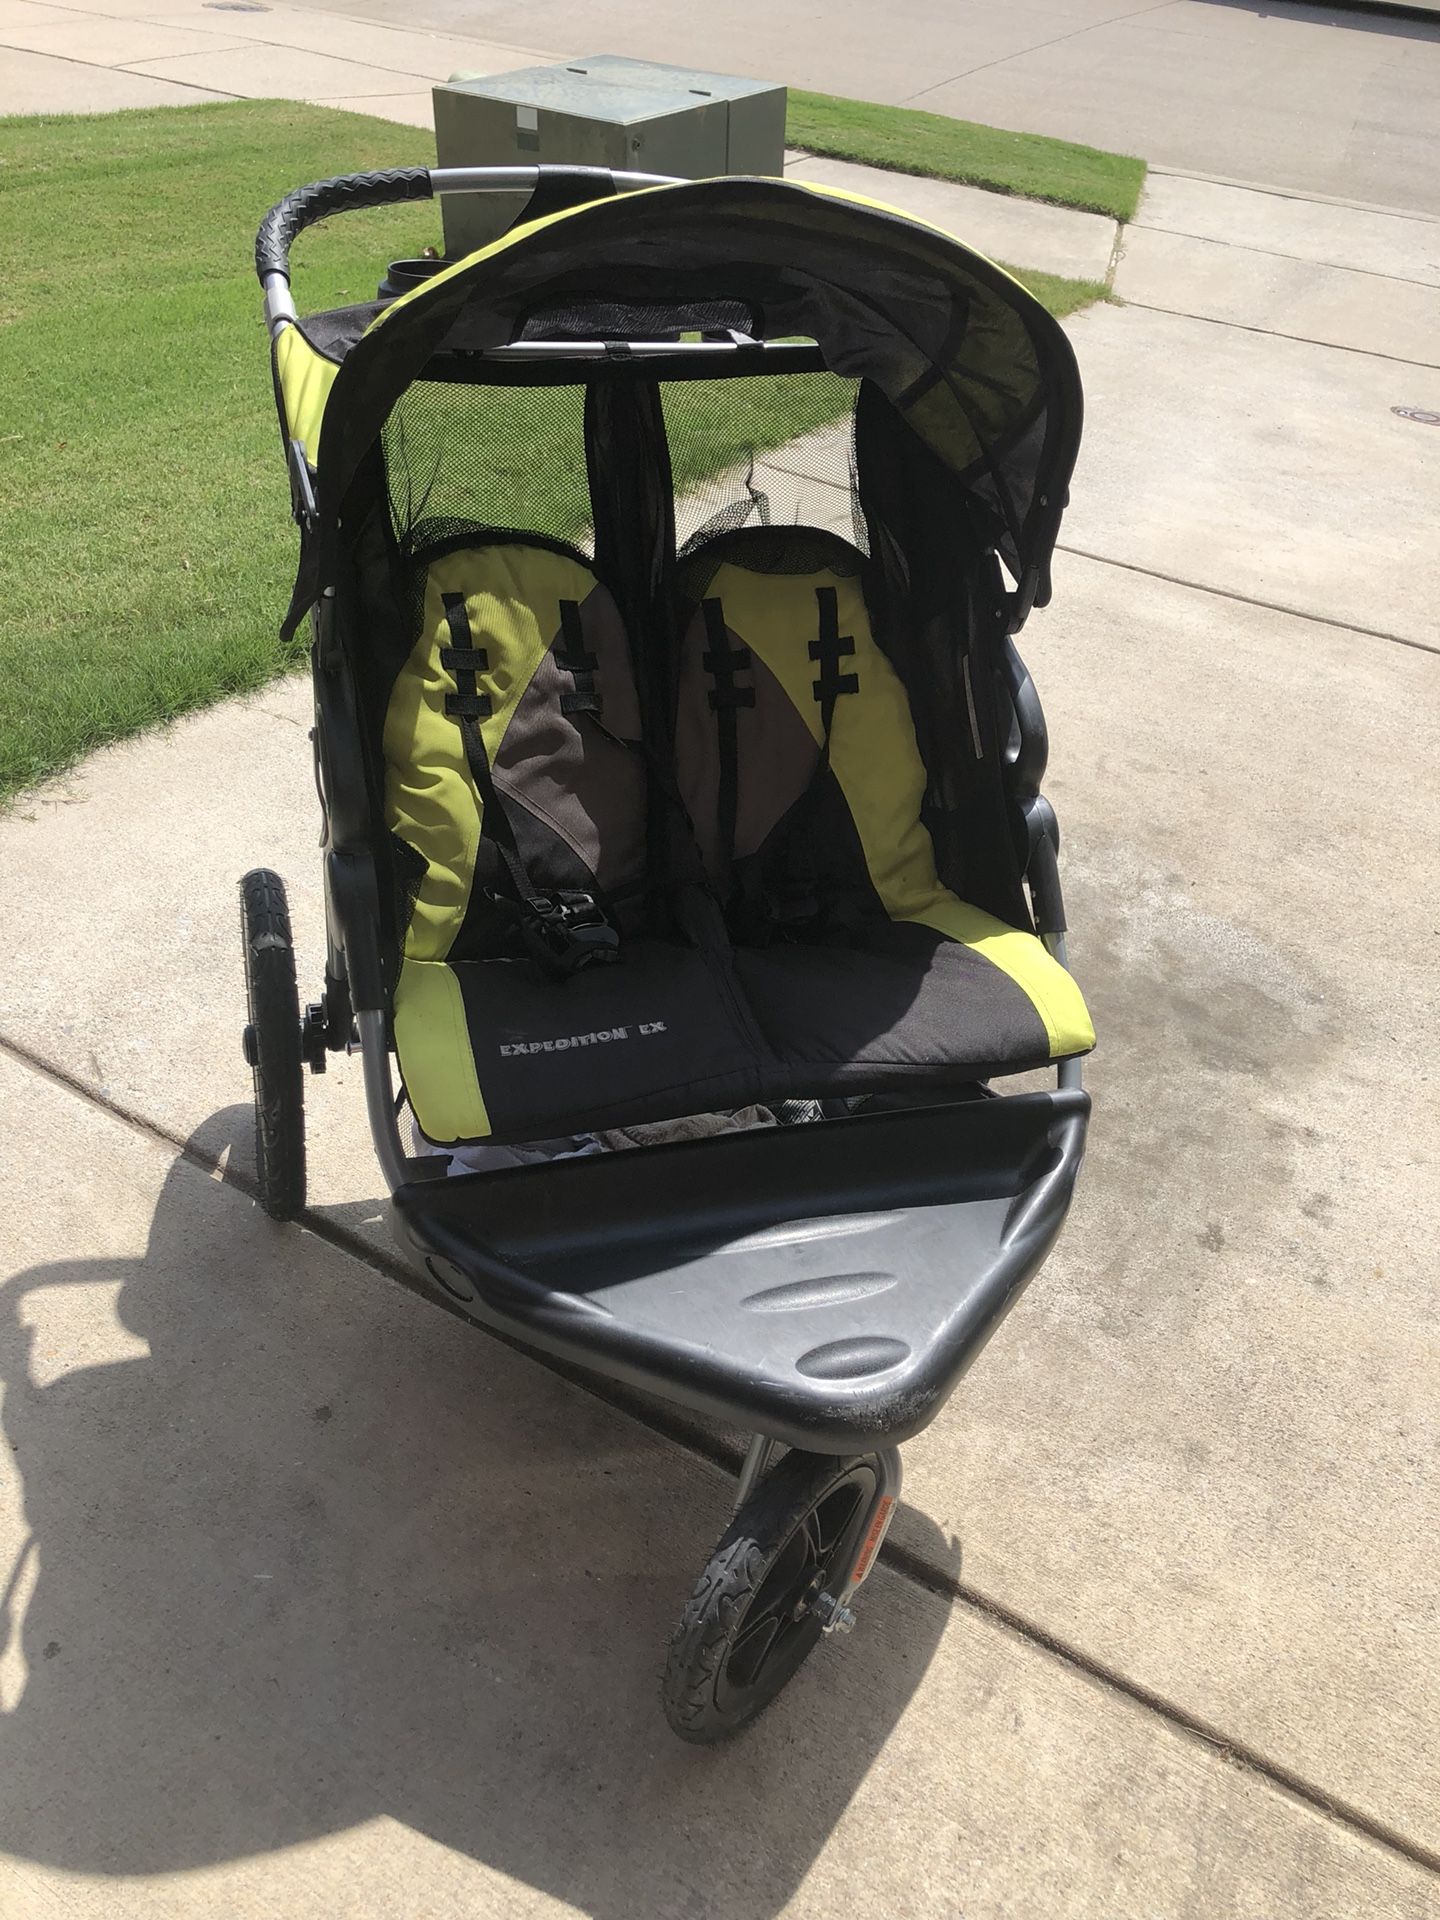 Expedition EX double stroller